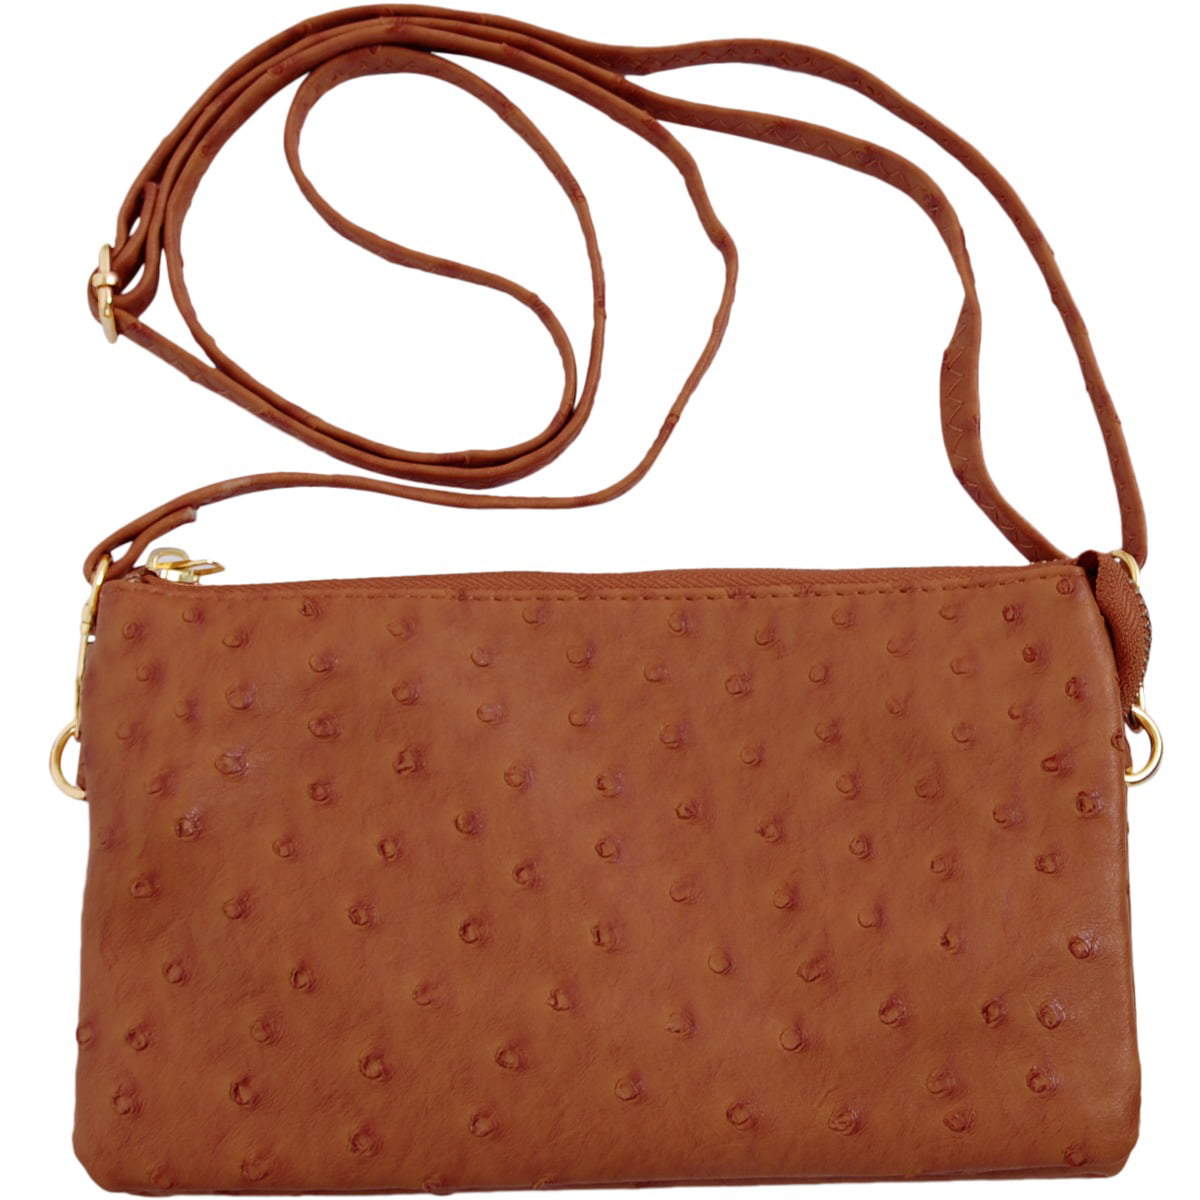 Vegan Leather Faux Ostrich Wristlet - Textured Dot Convertible Wallet  Crossbody Bag Clutch Purse with Shoulder Strap by Humble Chic NY, Saddle  Brown Ostrich, Camel, Tan, Cognac, Walnut - Walmart.com